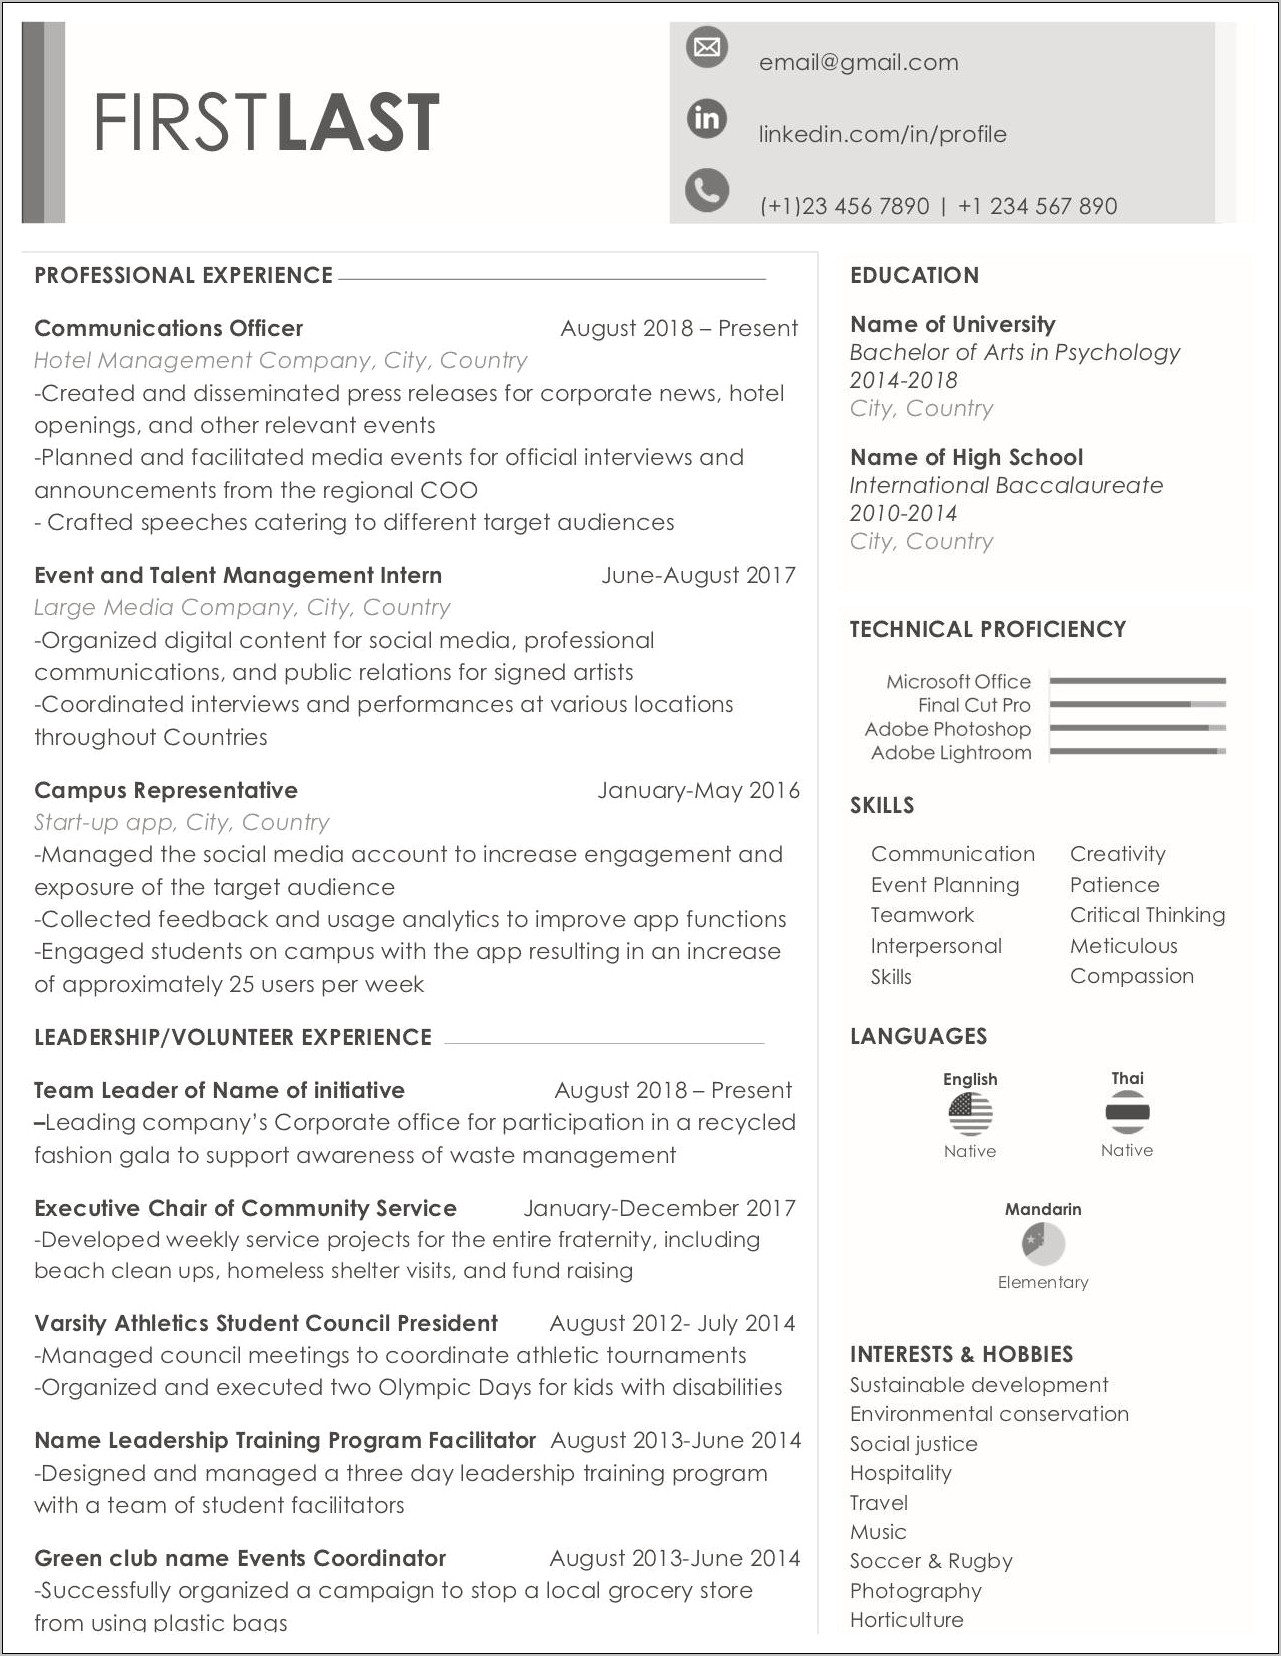 Resume Current Job First Or Last